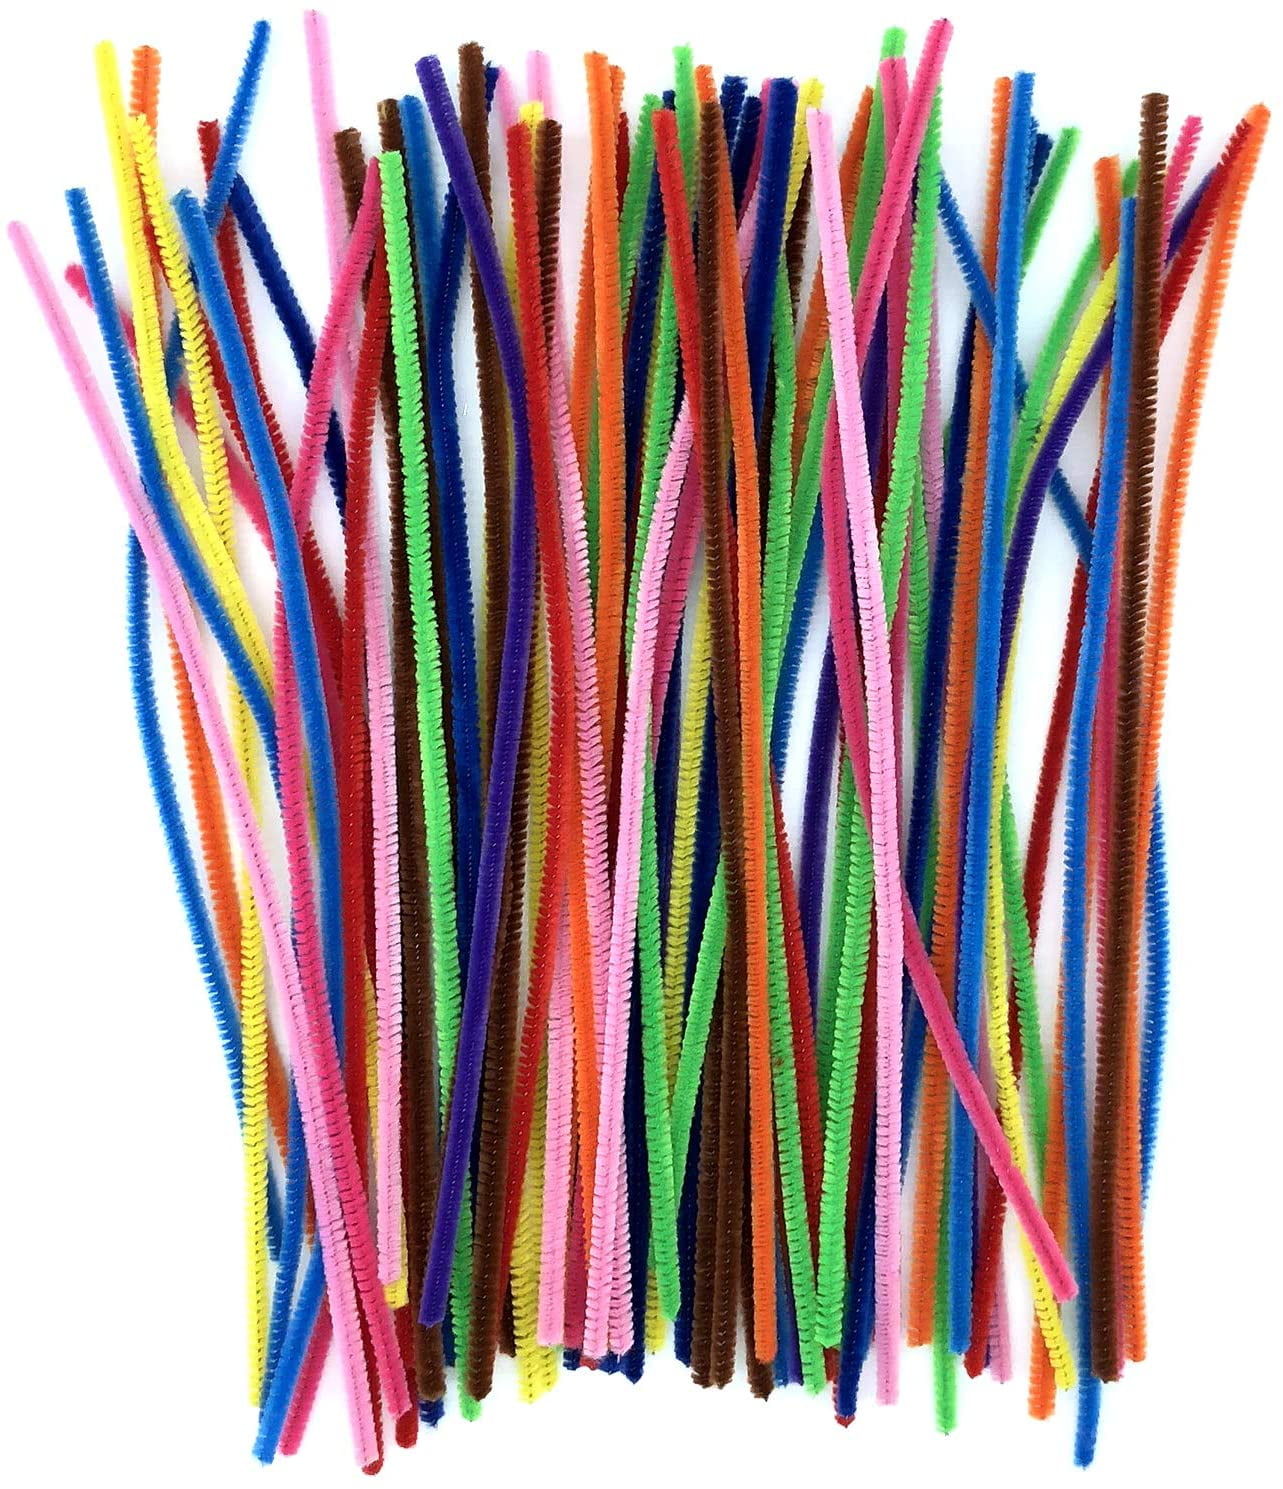 DOKOO Craft Pipe Cleaners 200 PCS Chenille Stem Twistable Stems Children’s Bendable Sculpting Sticks for Crafts and Arts Creative Christmas Decoration School Projects 6MM x 12 Inch RED 